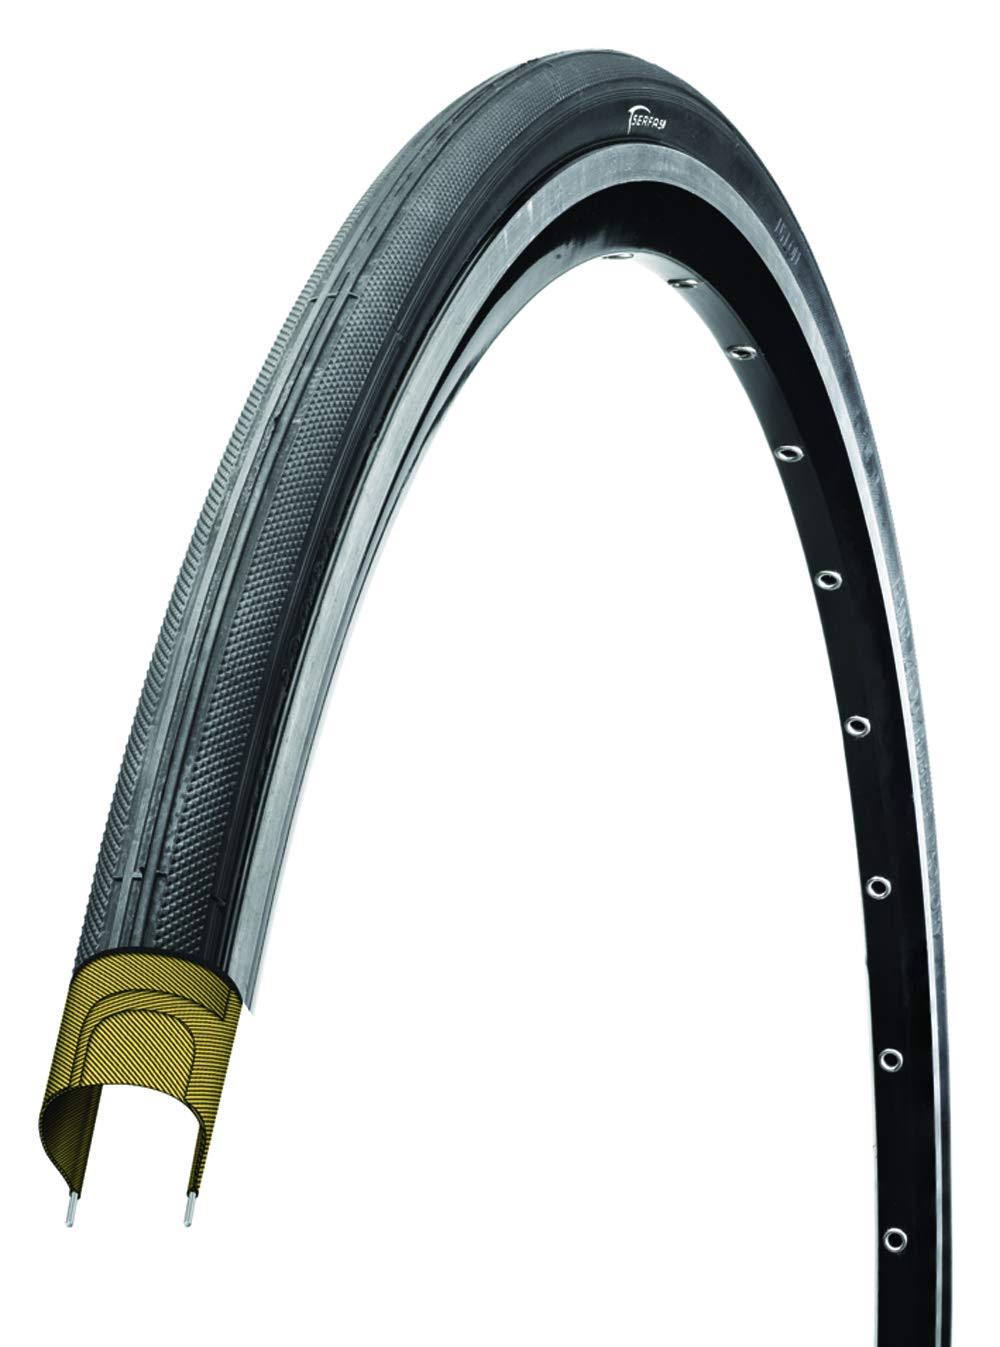 Serfas MEO Chase Road Bicycle Tire - 700c x 23c